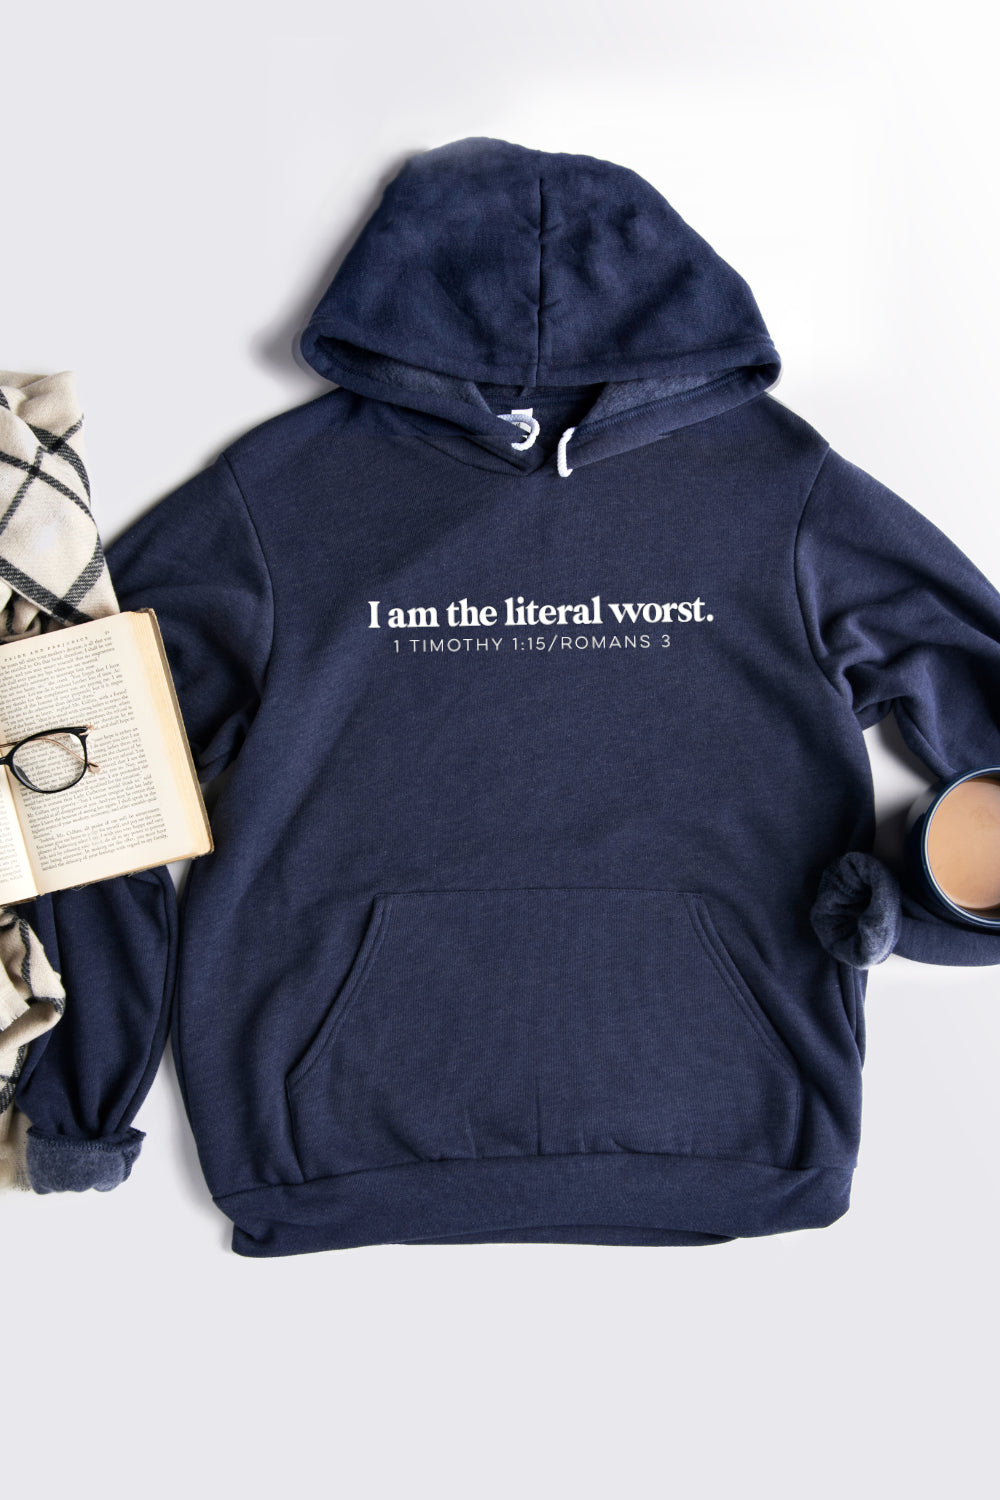 "I am the Literal Worst" Hoodie